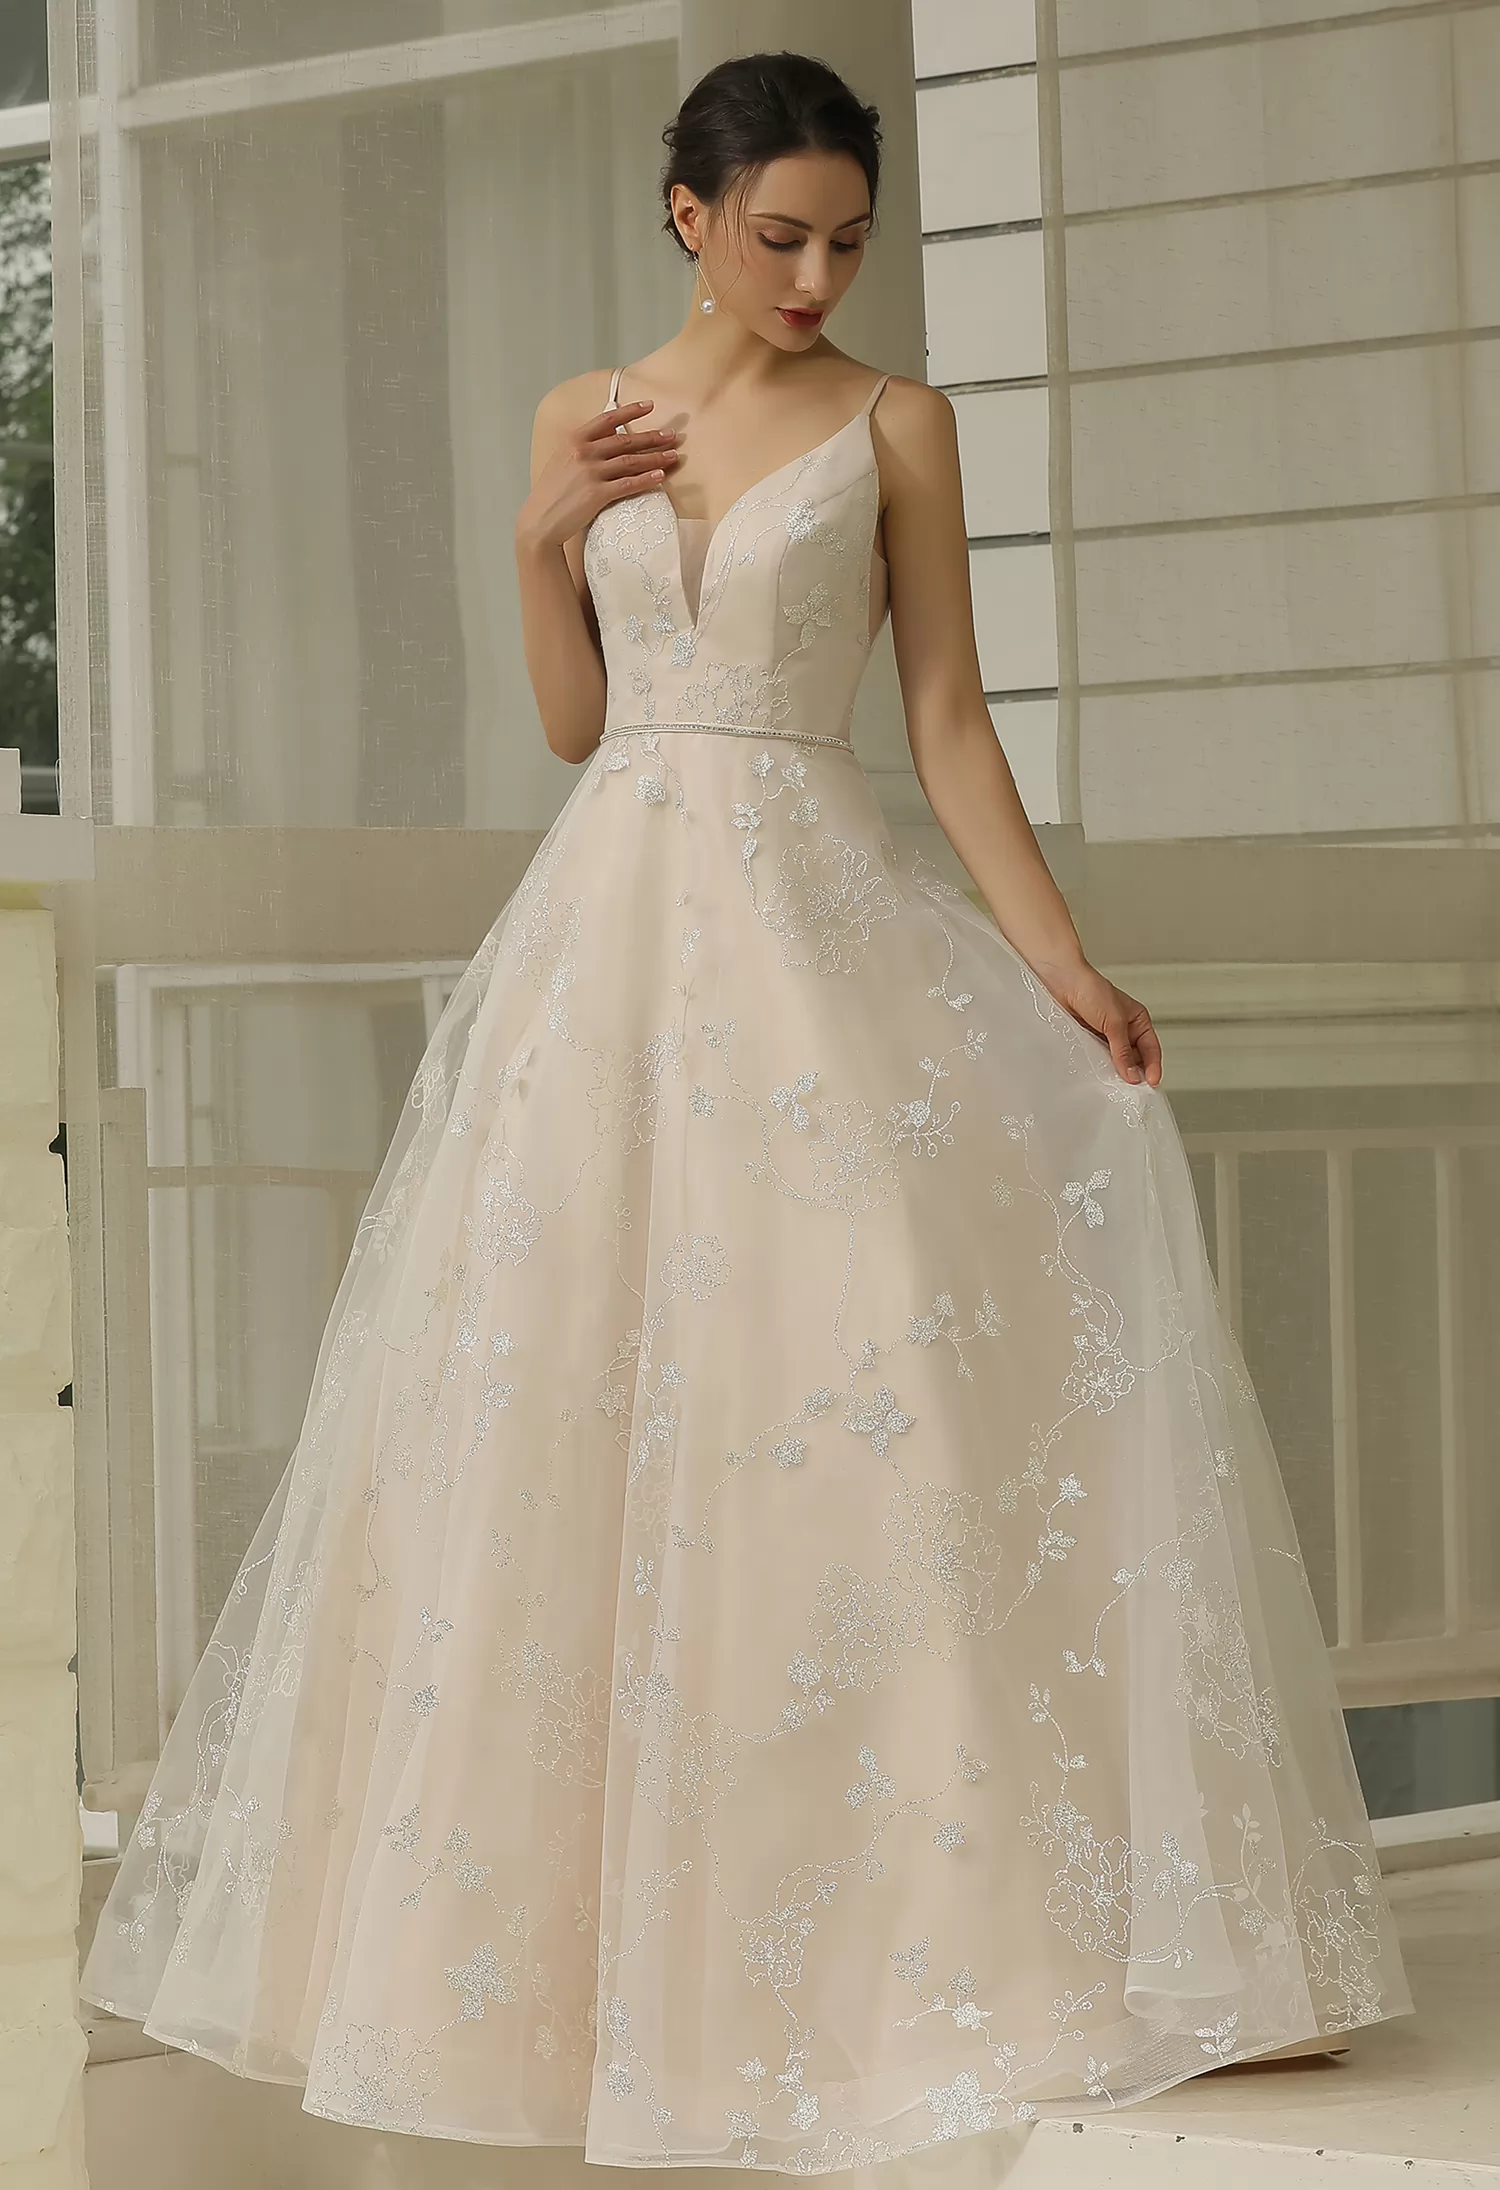 Glitter Patterned  Wholesale  Wedding Dress Bridal Gown